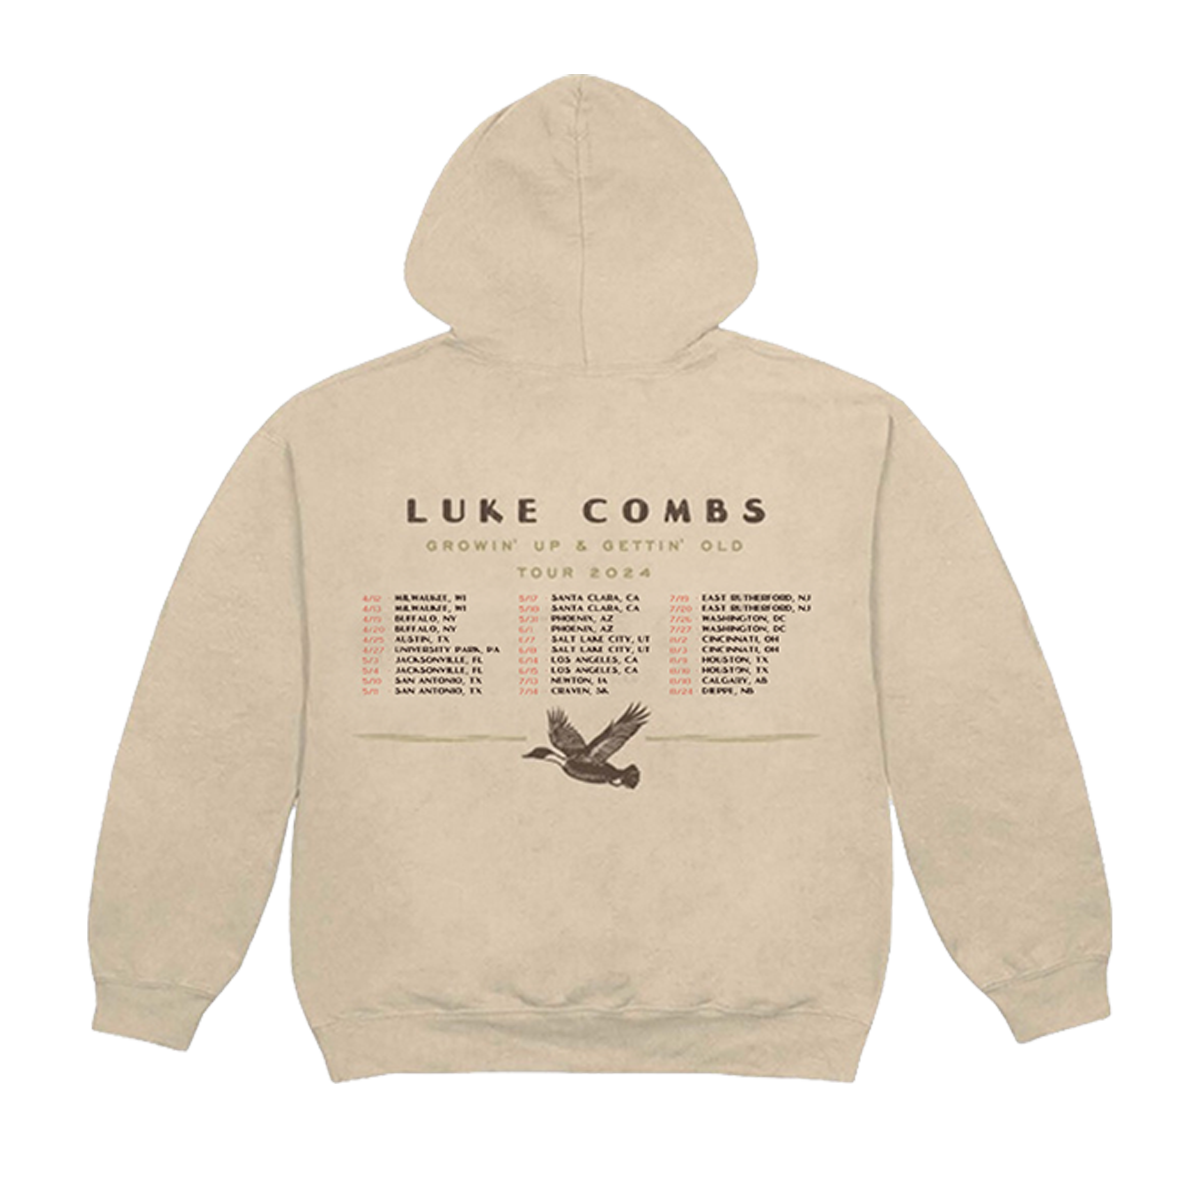 Growin' Up and Gettin' Old Tour Hoodie